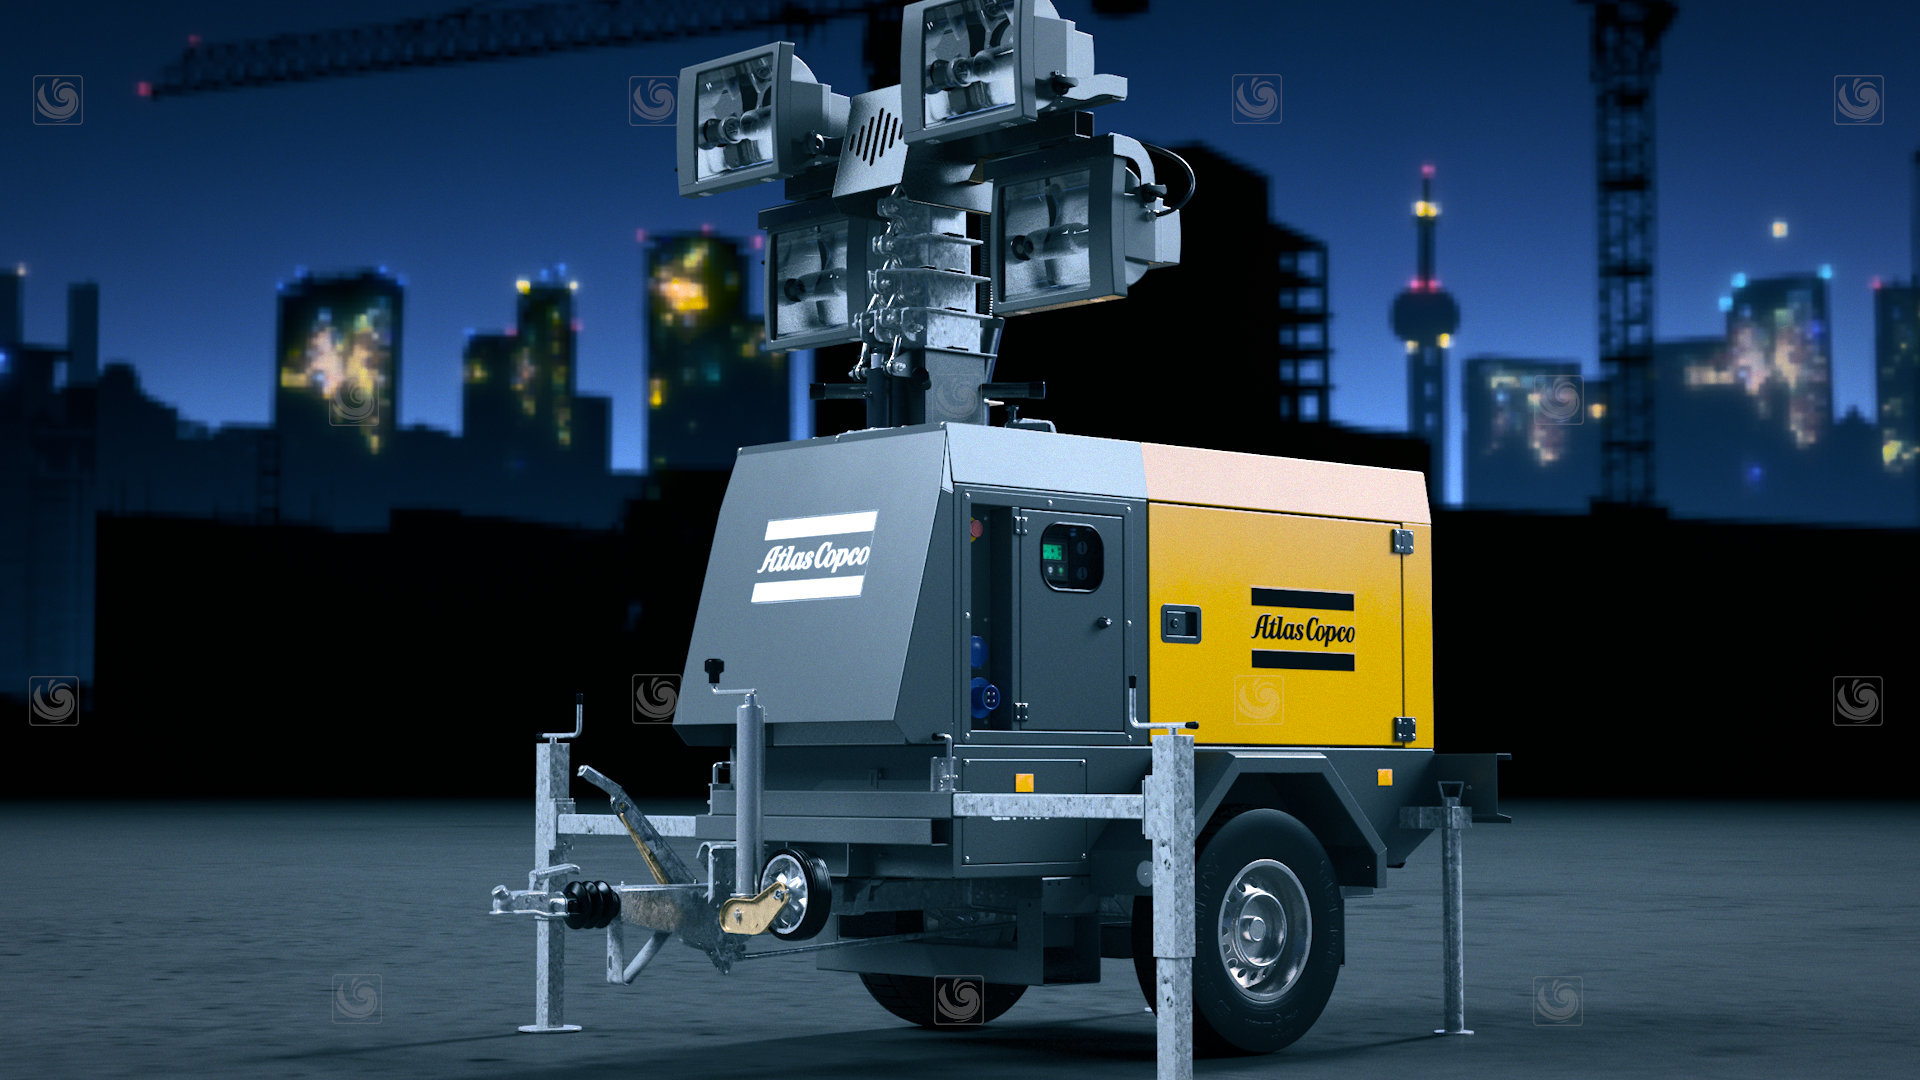 Videoframe from a 3D animation showing an Atlas Copco machinery